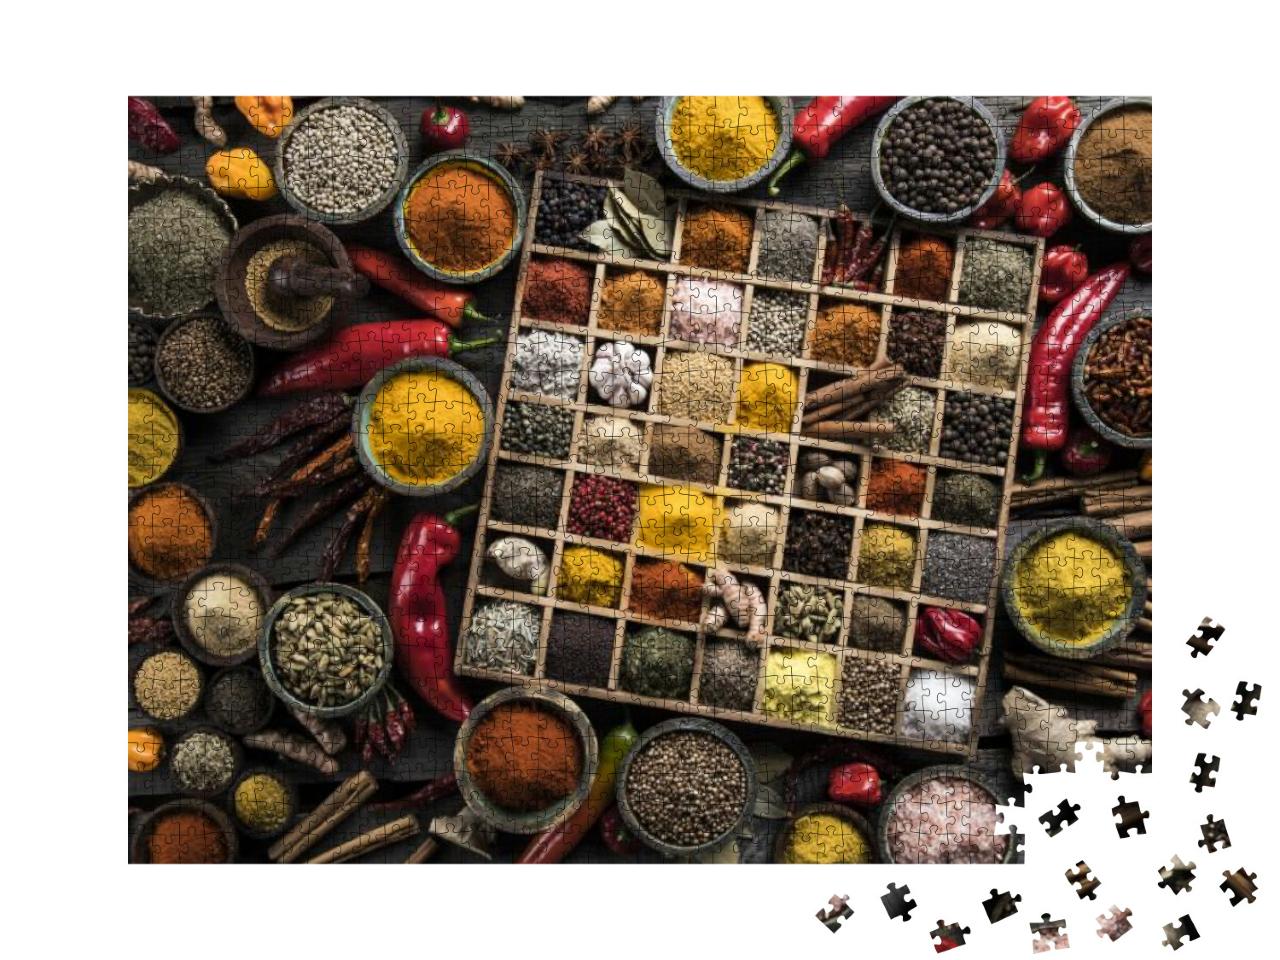 Variety of Wooden Box, Spices & Herbs on Kitchen Table... Jigsaw Puzzle with 1000 pieces